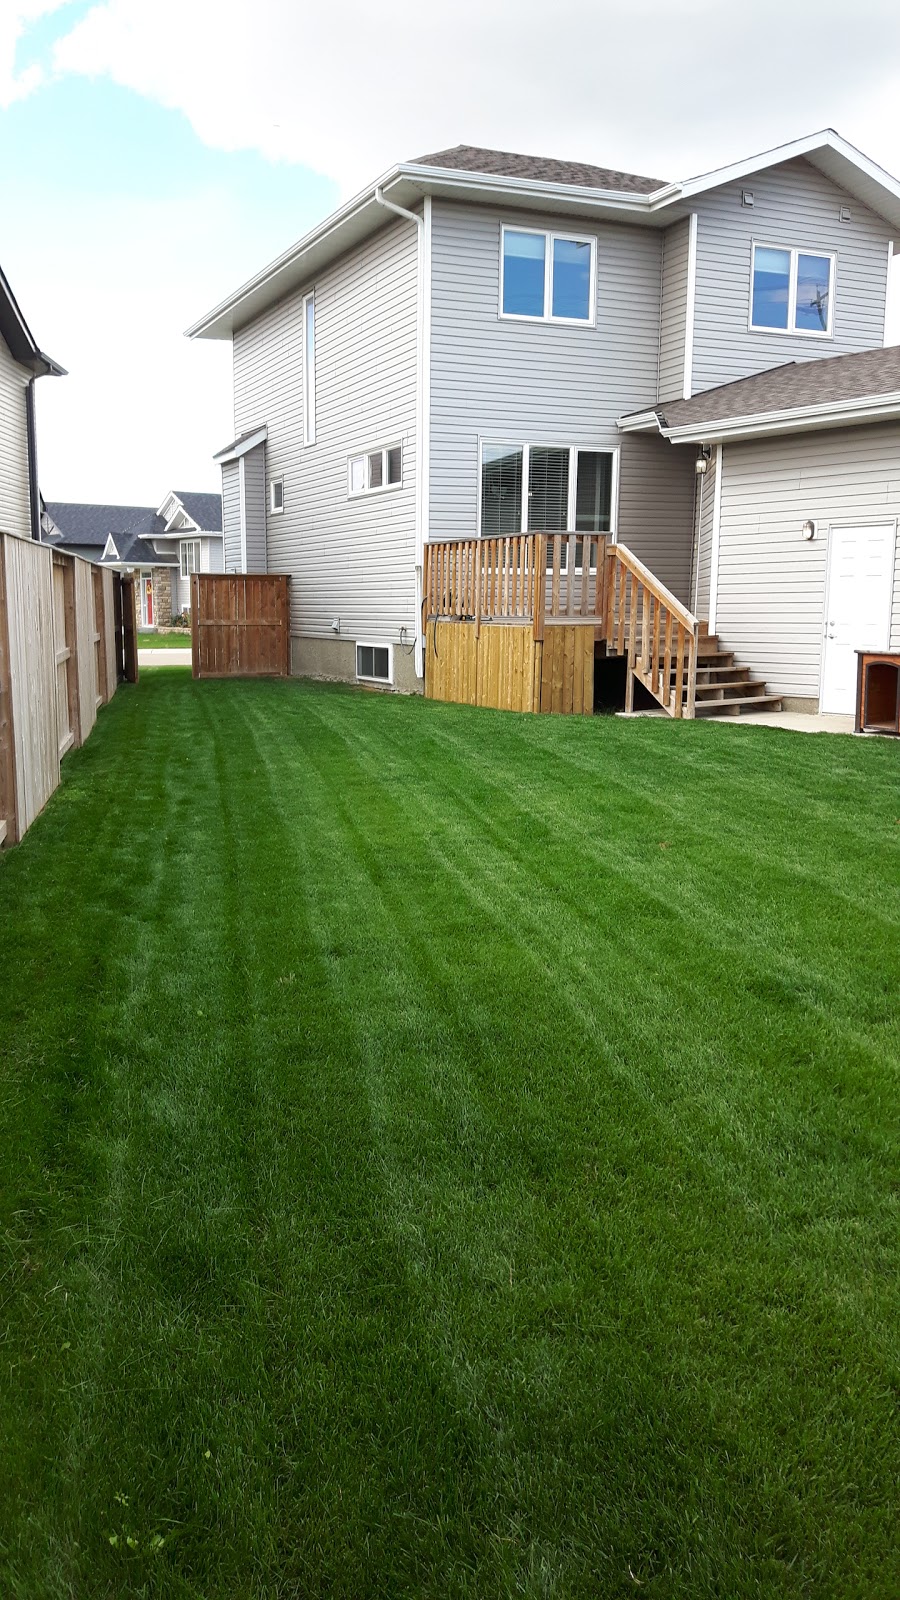 Brothers Lawn Care | point of interest | 31A Timberstone Way, Red Deer, AB T4P 0V4, Canada | 4038481428 OR +1 403-848-1428